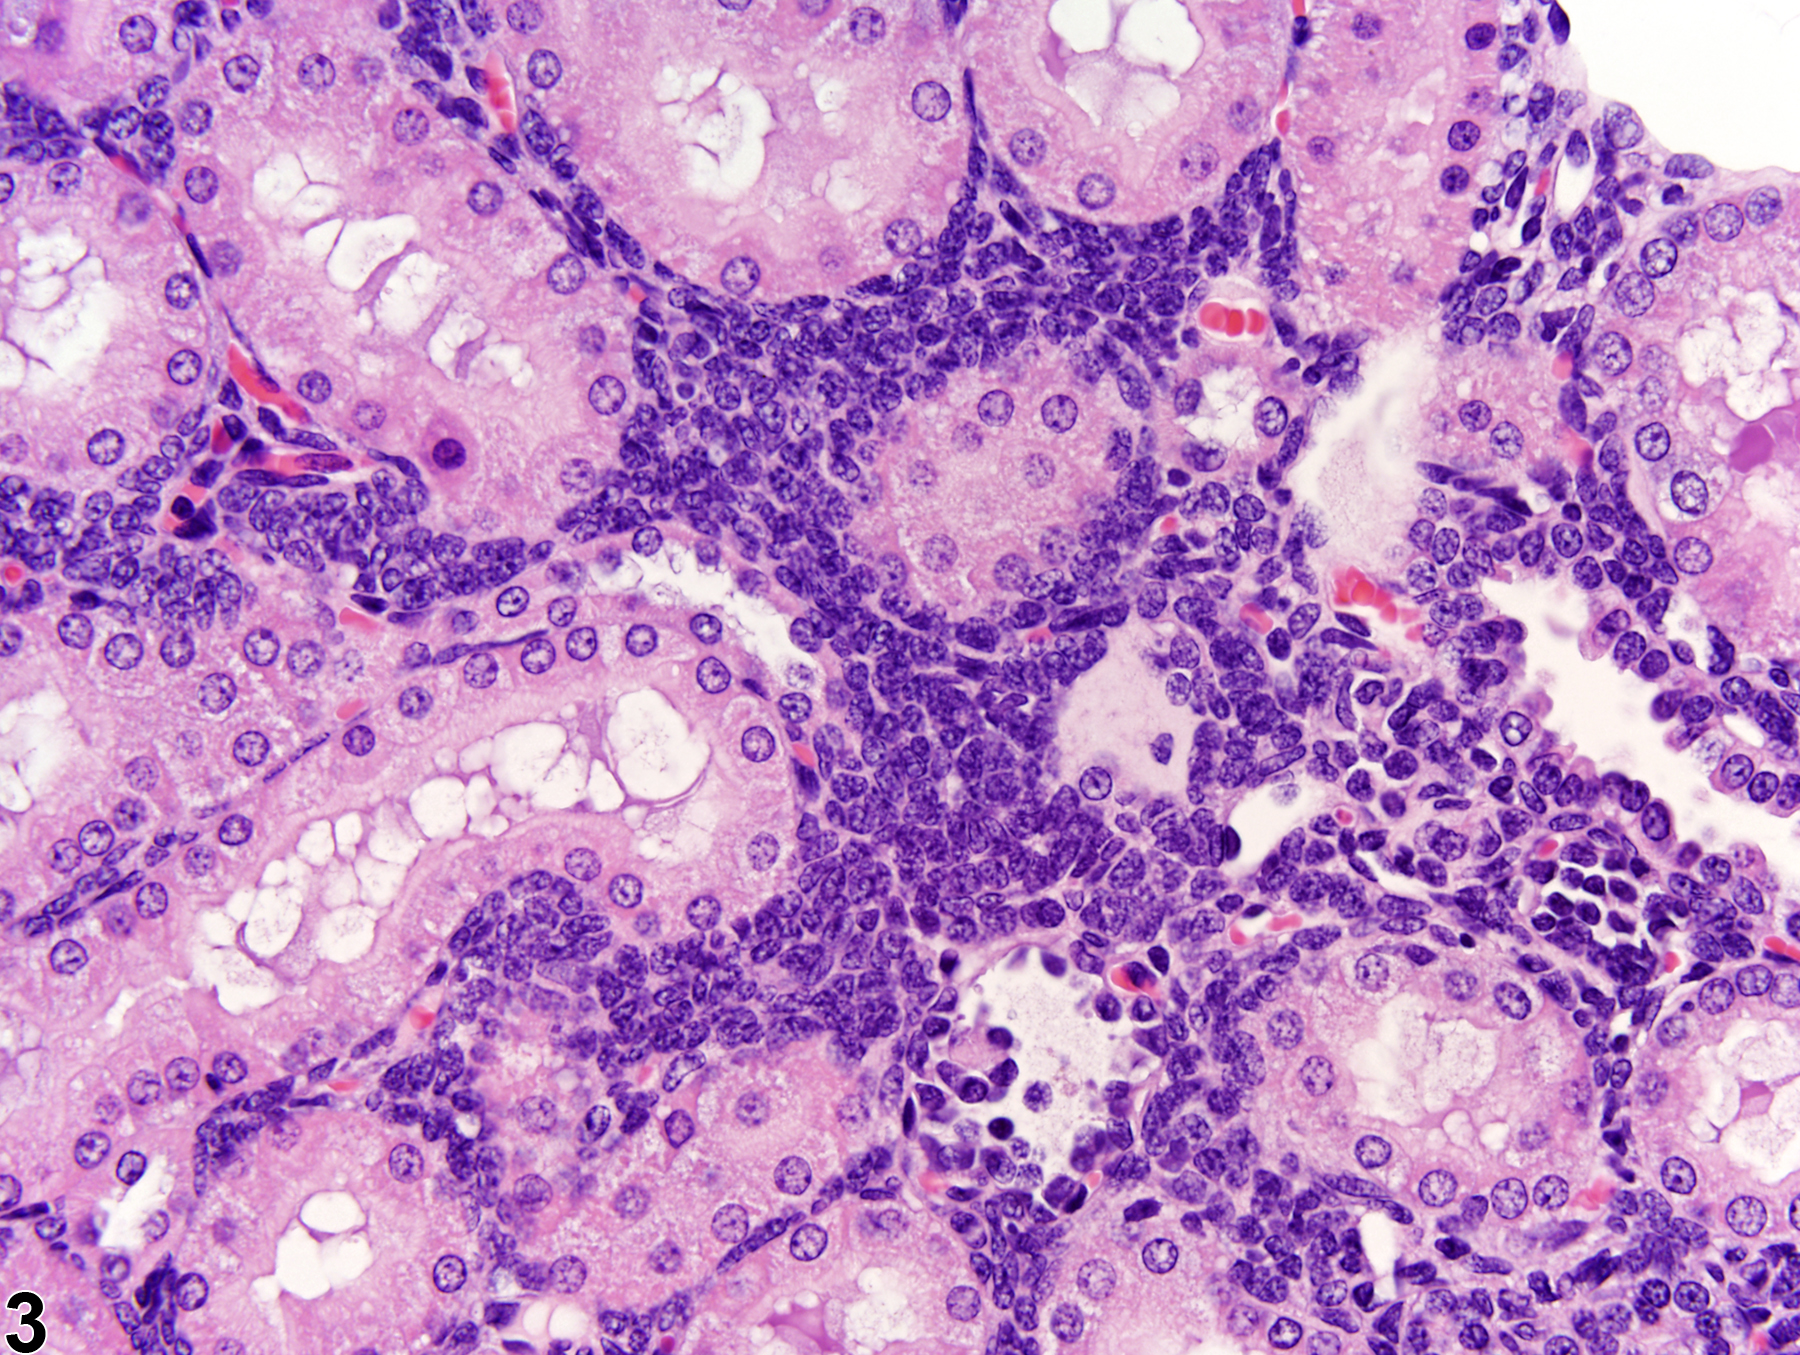 Image of nephroblastematosis in the kidney from a female Harlan Sprague-Dawley rat in a subchronic study